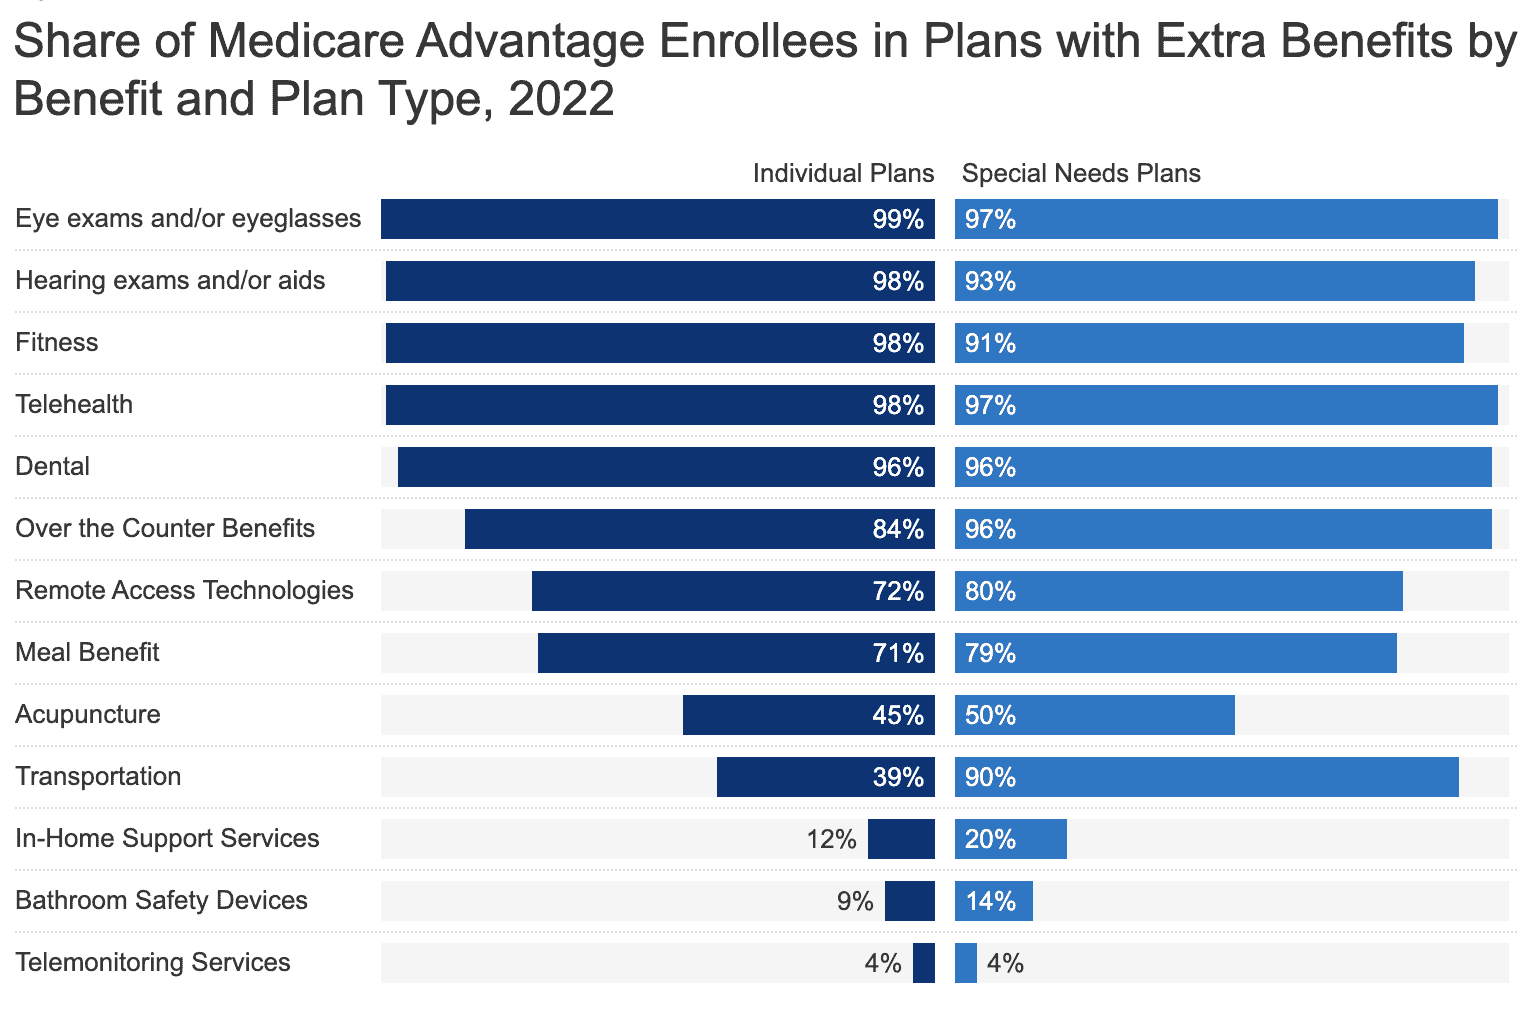 The vast majority of Medicare Advantage plans provide extra benefits for vision, hearing, fitness, telehealth, dental, and OTC medications. (Graph provided by the Kaiser Family Foundation)